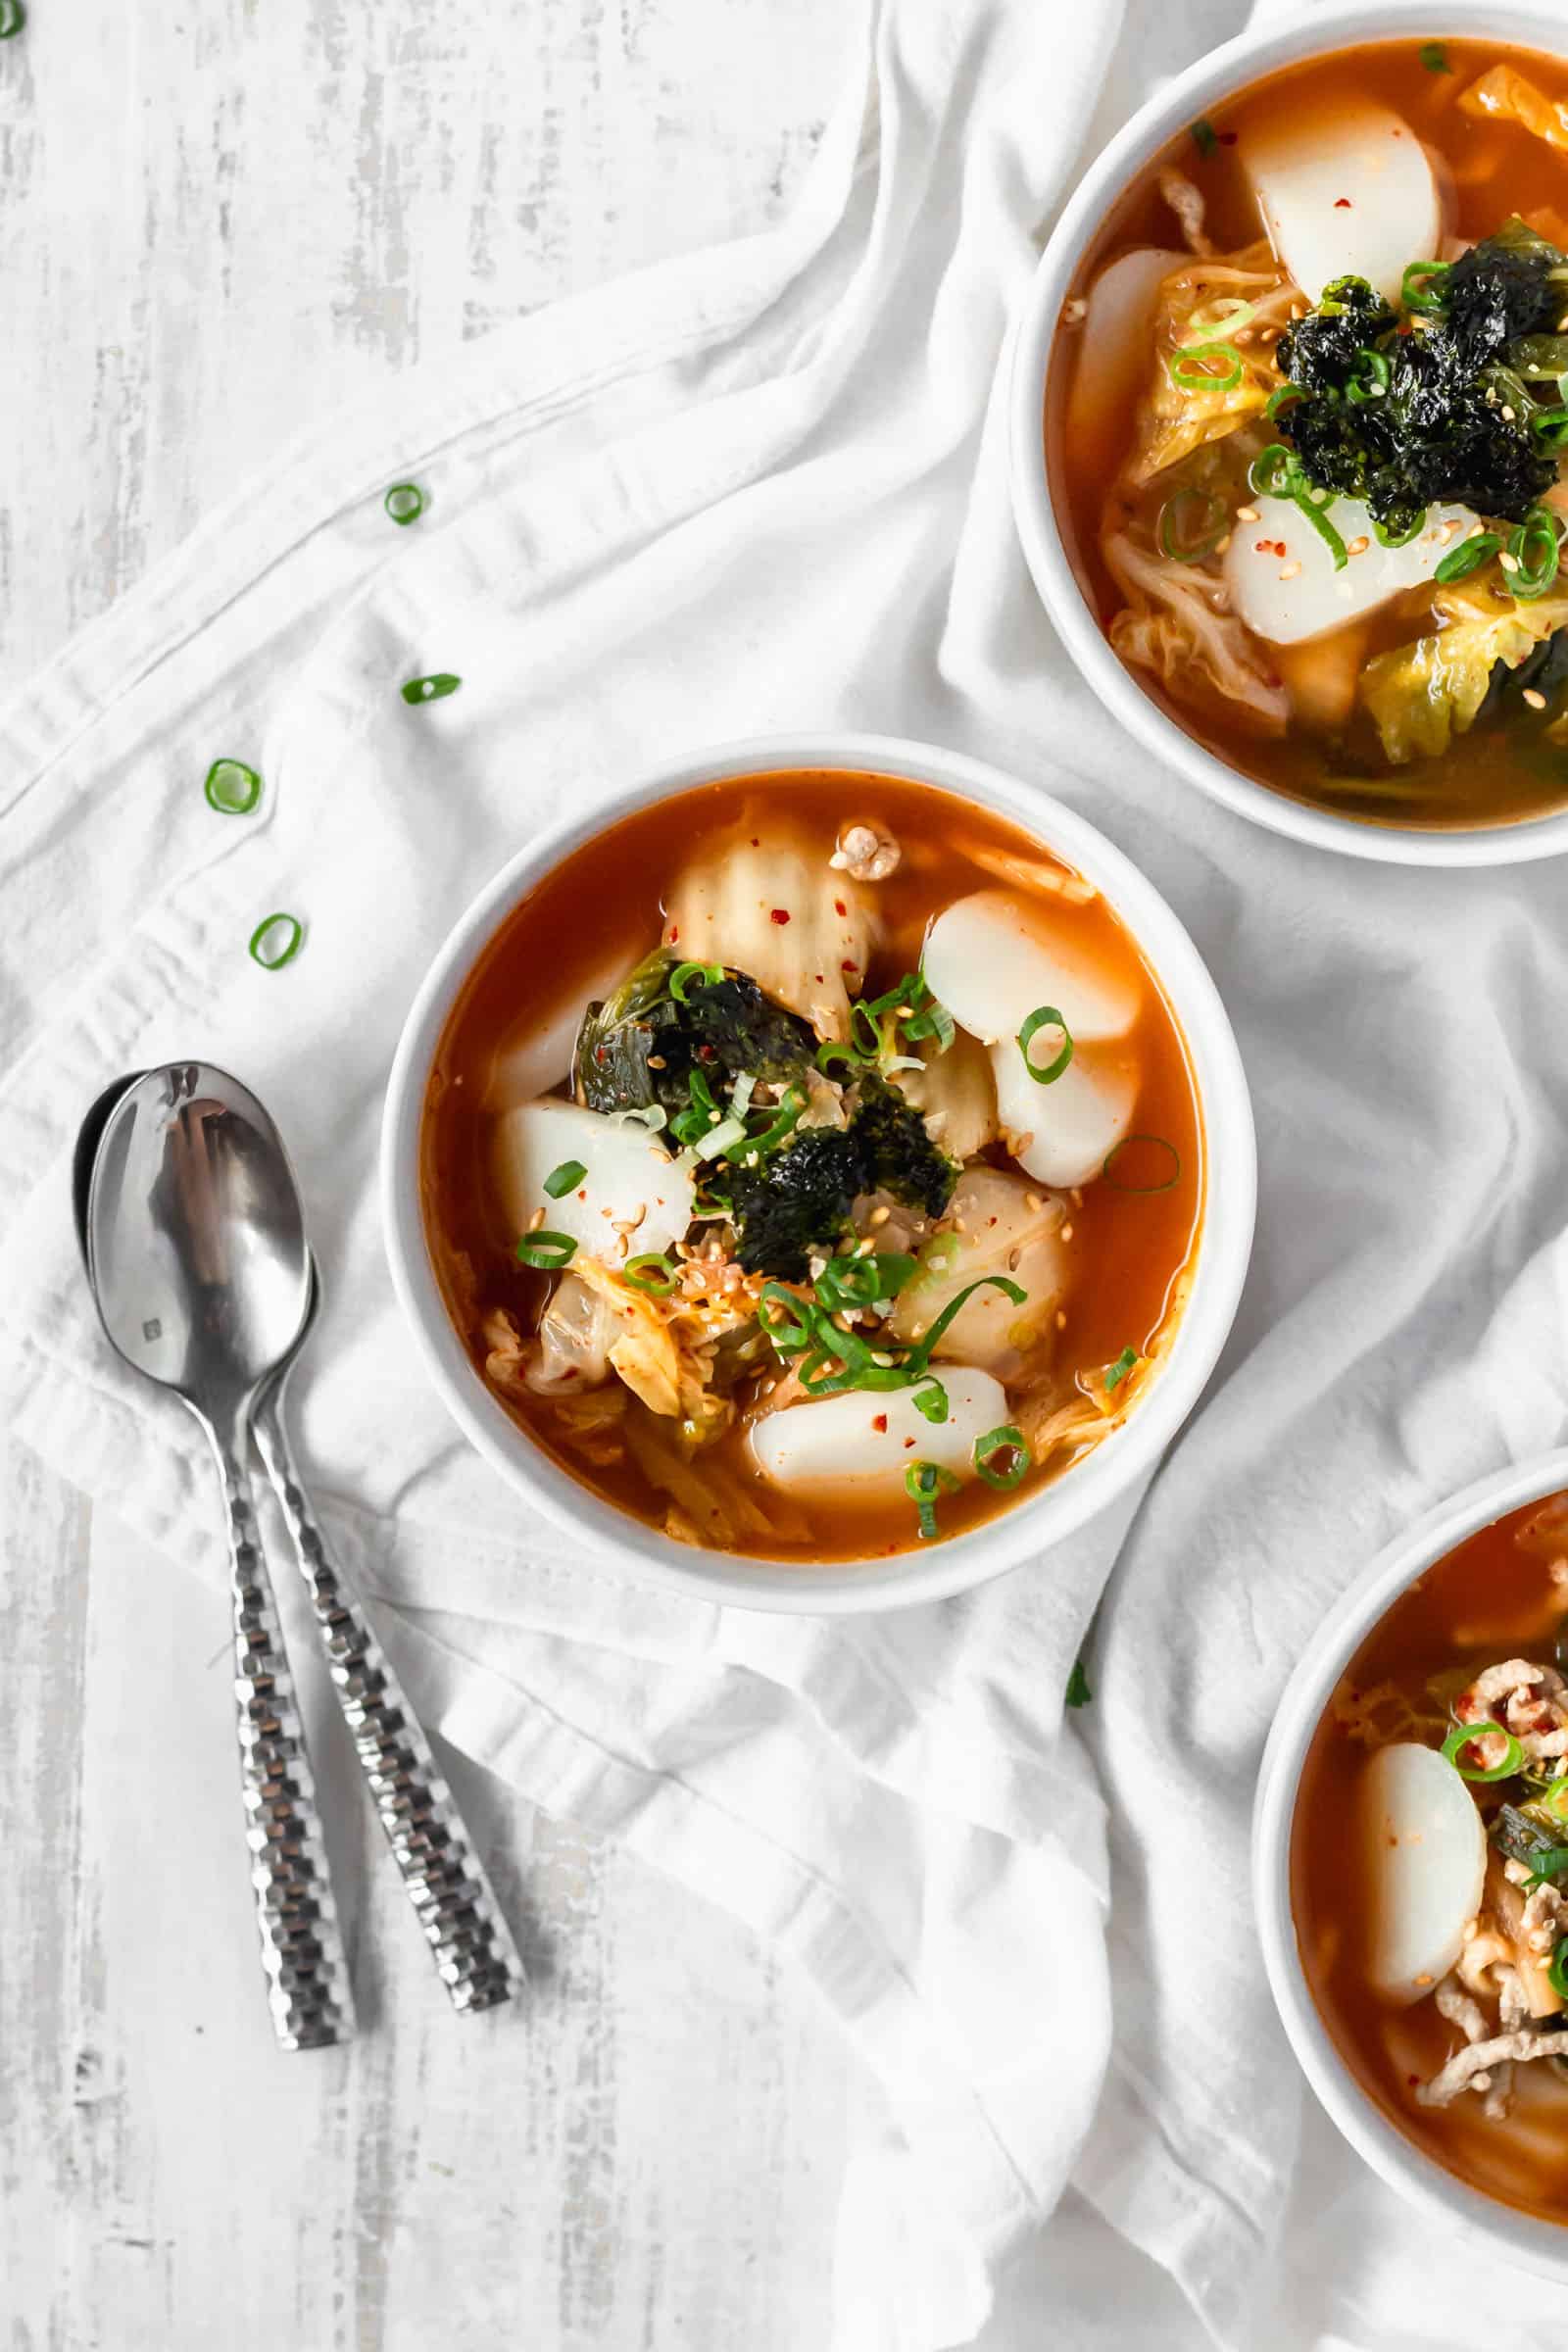 Kimchi tteokguk is a spicy and hearty soup with Korean mochi that'll keep you warm and healthy! The kimchi adds probiotics for a healthy gut! #kimchisoup #probiotics #spicysoup #Koreanfood #healthymeals